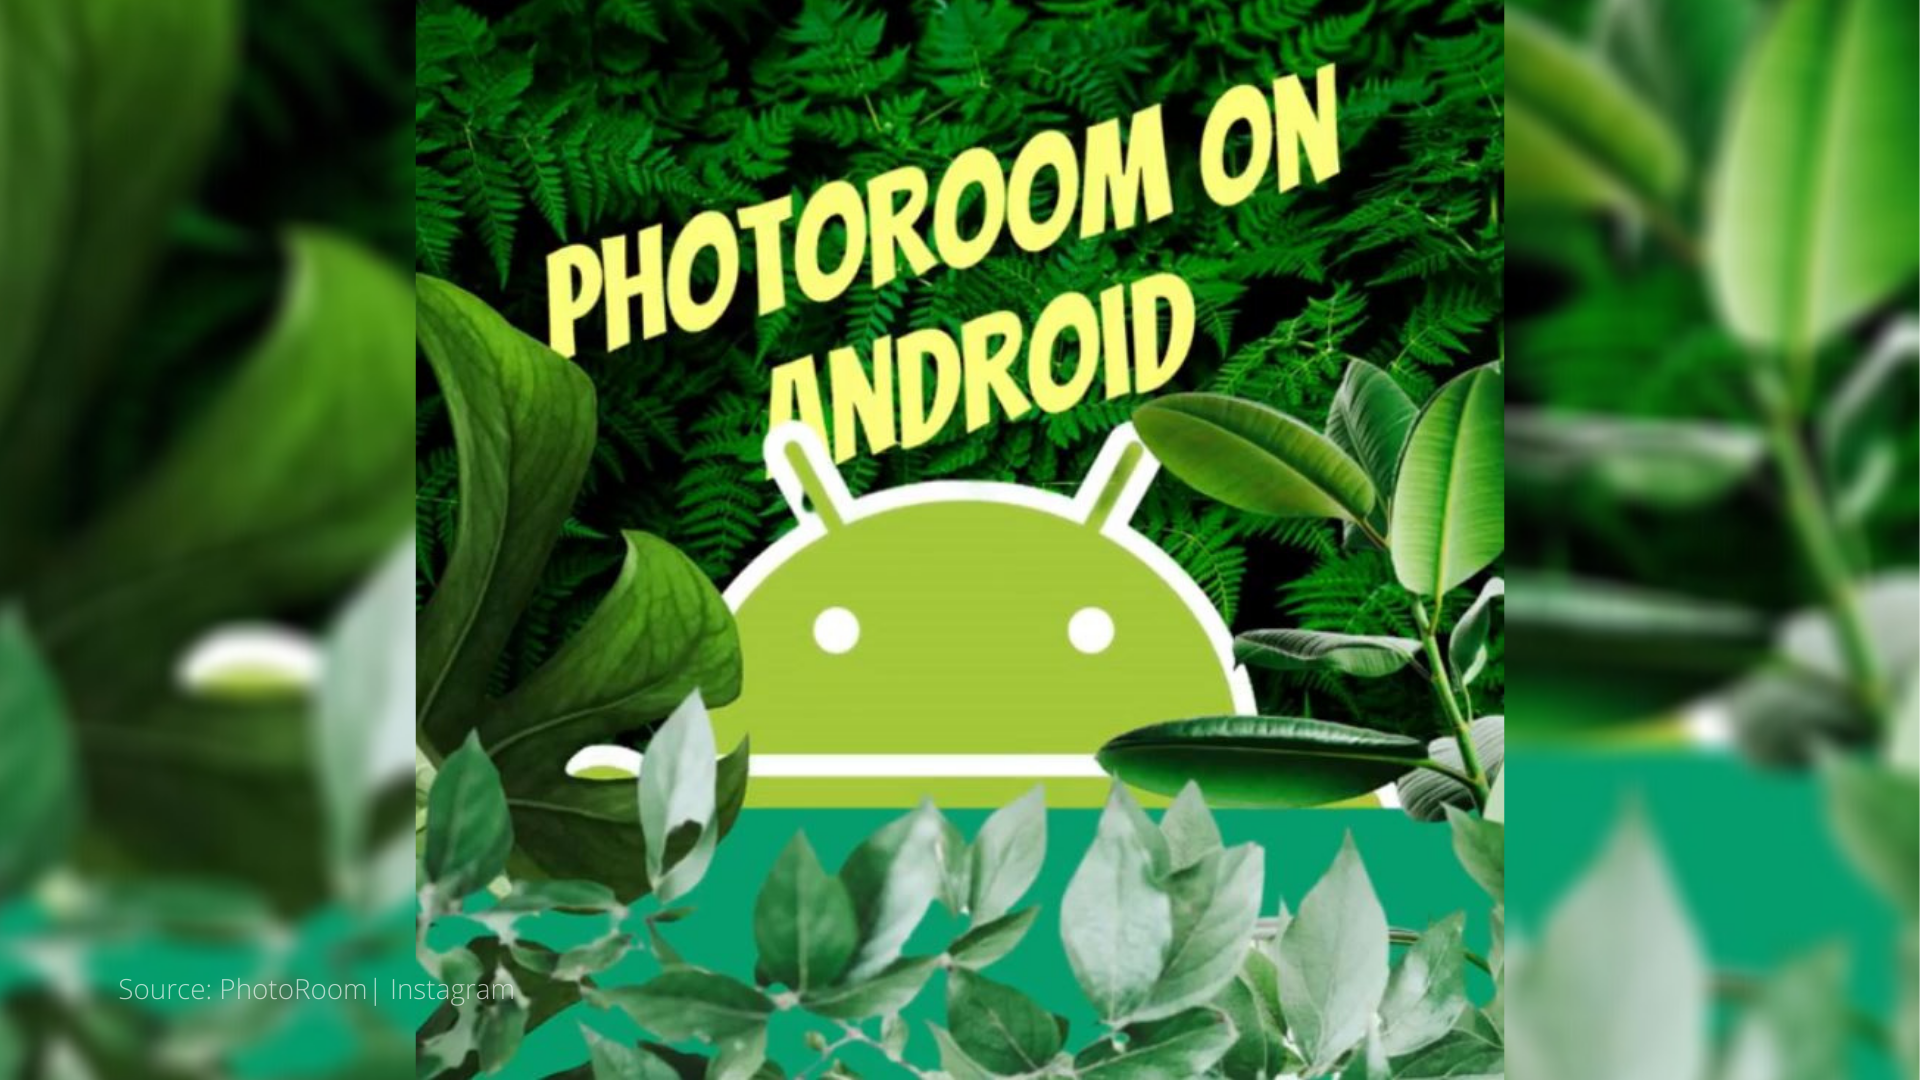 Background-Removal App PhotoRoom is Now on Android